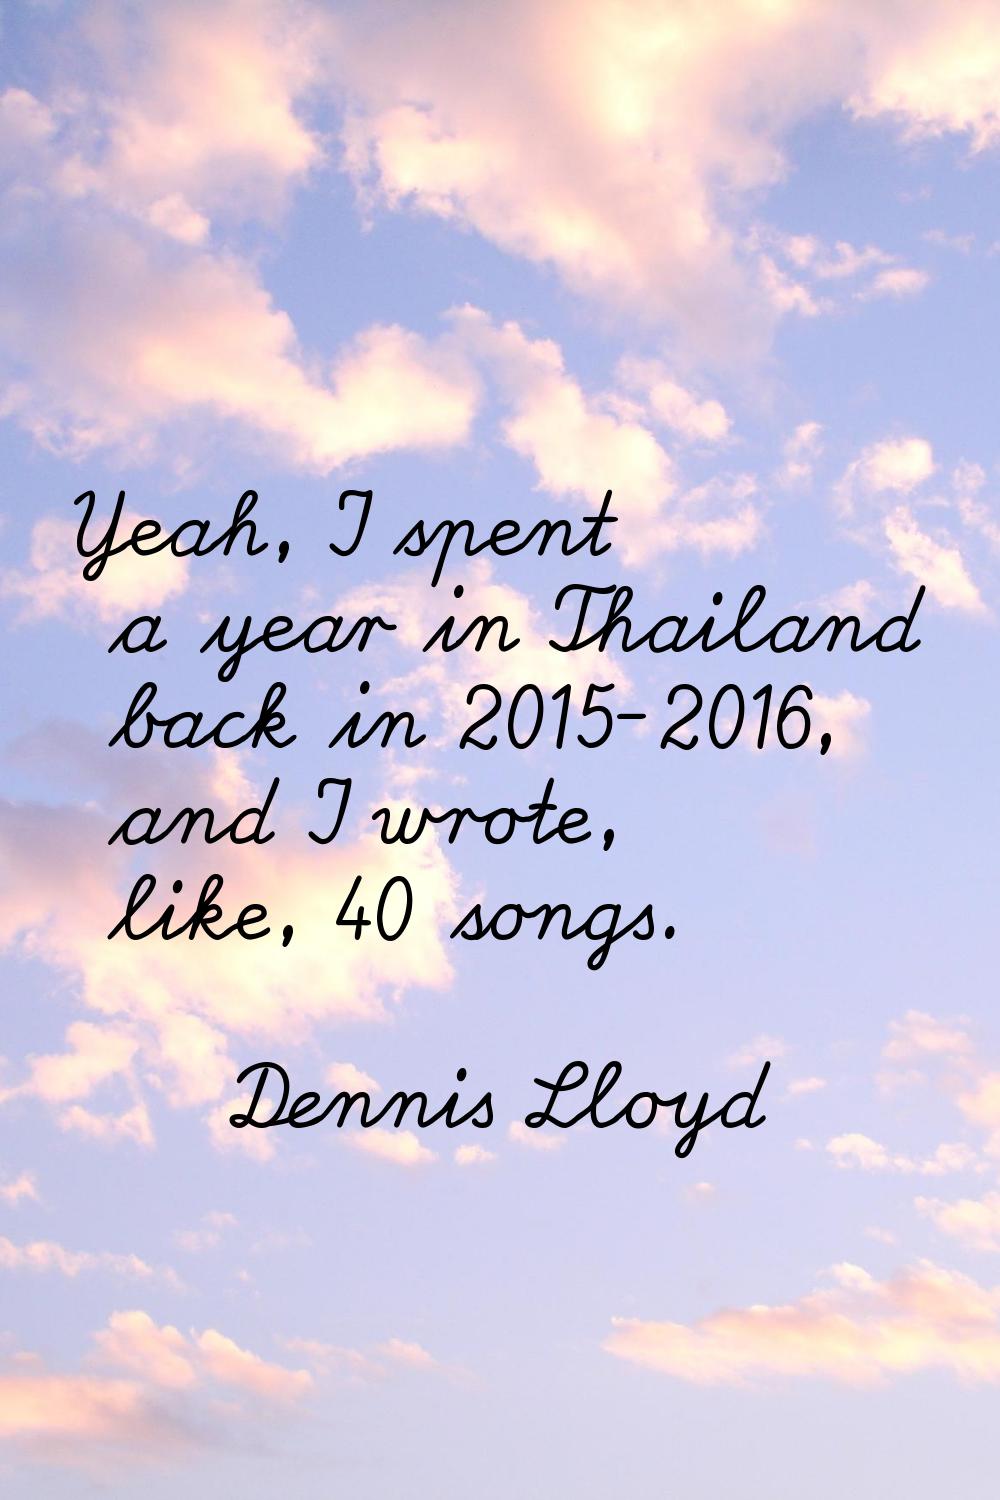 Yeah, I spent a year in Thailand back in 2015-2016, and I wrote, like, 40 songs.